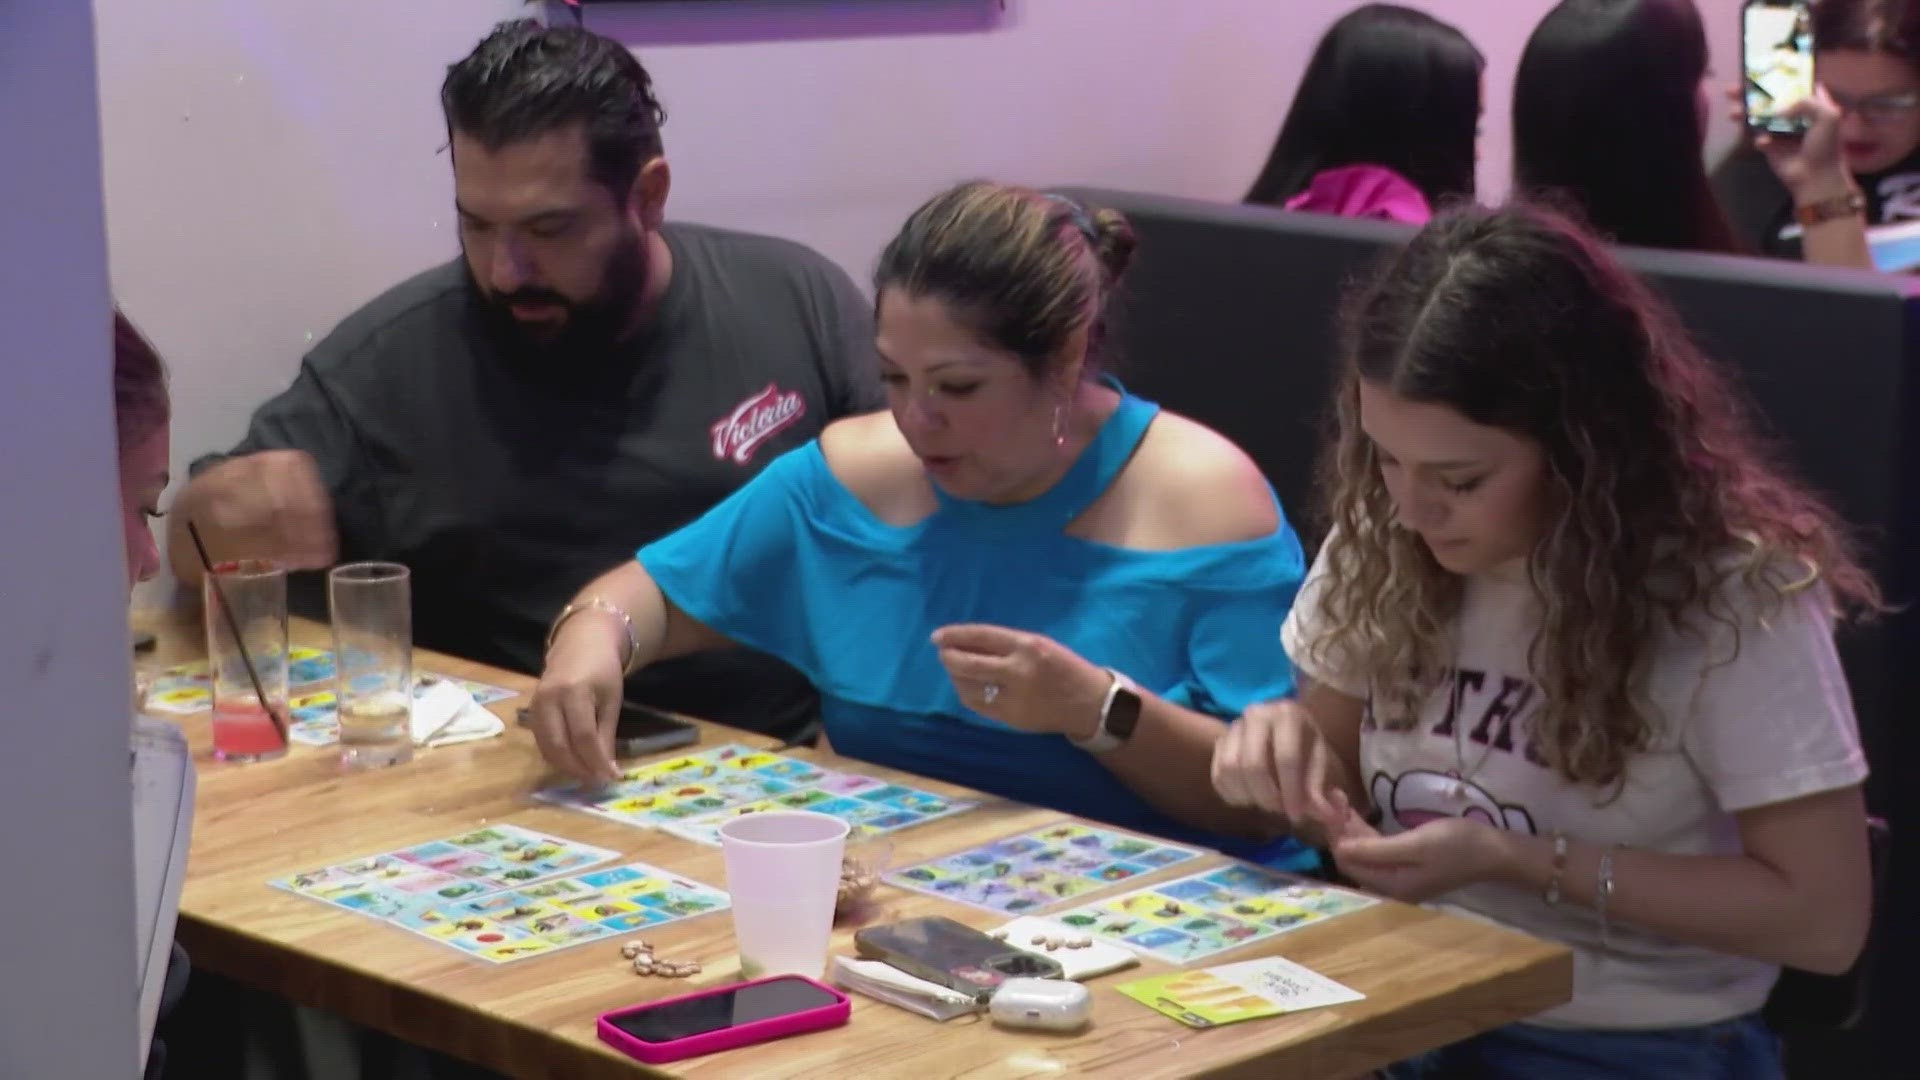 Downtown Houston restaurant drawing crowds with Lotería